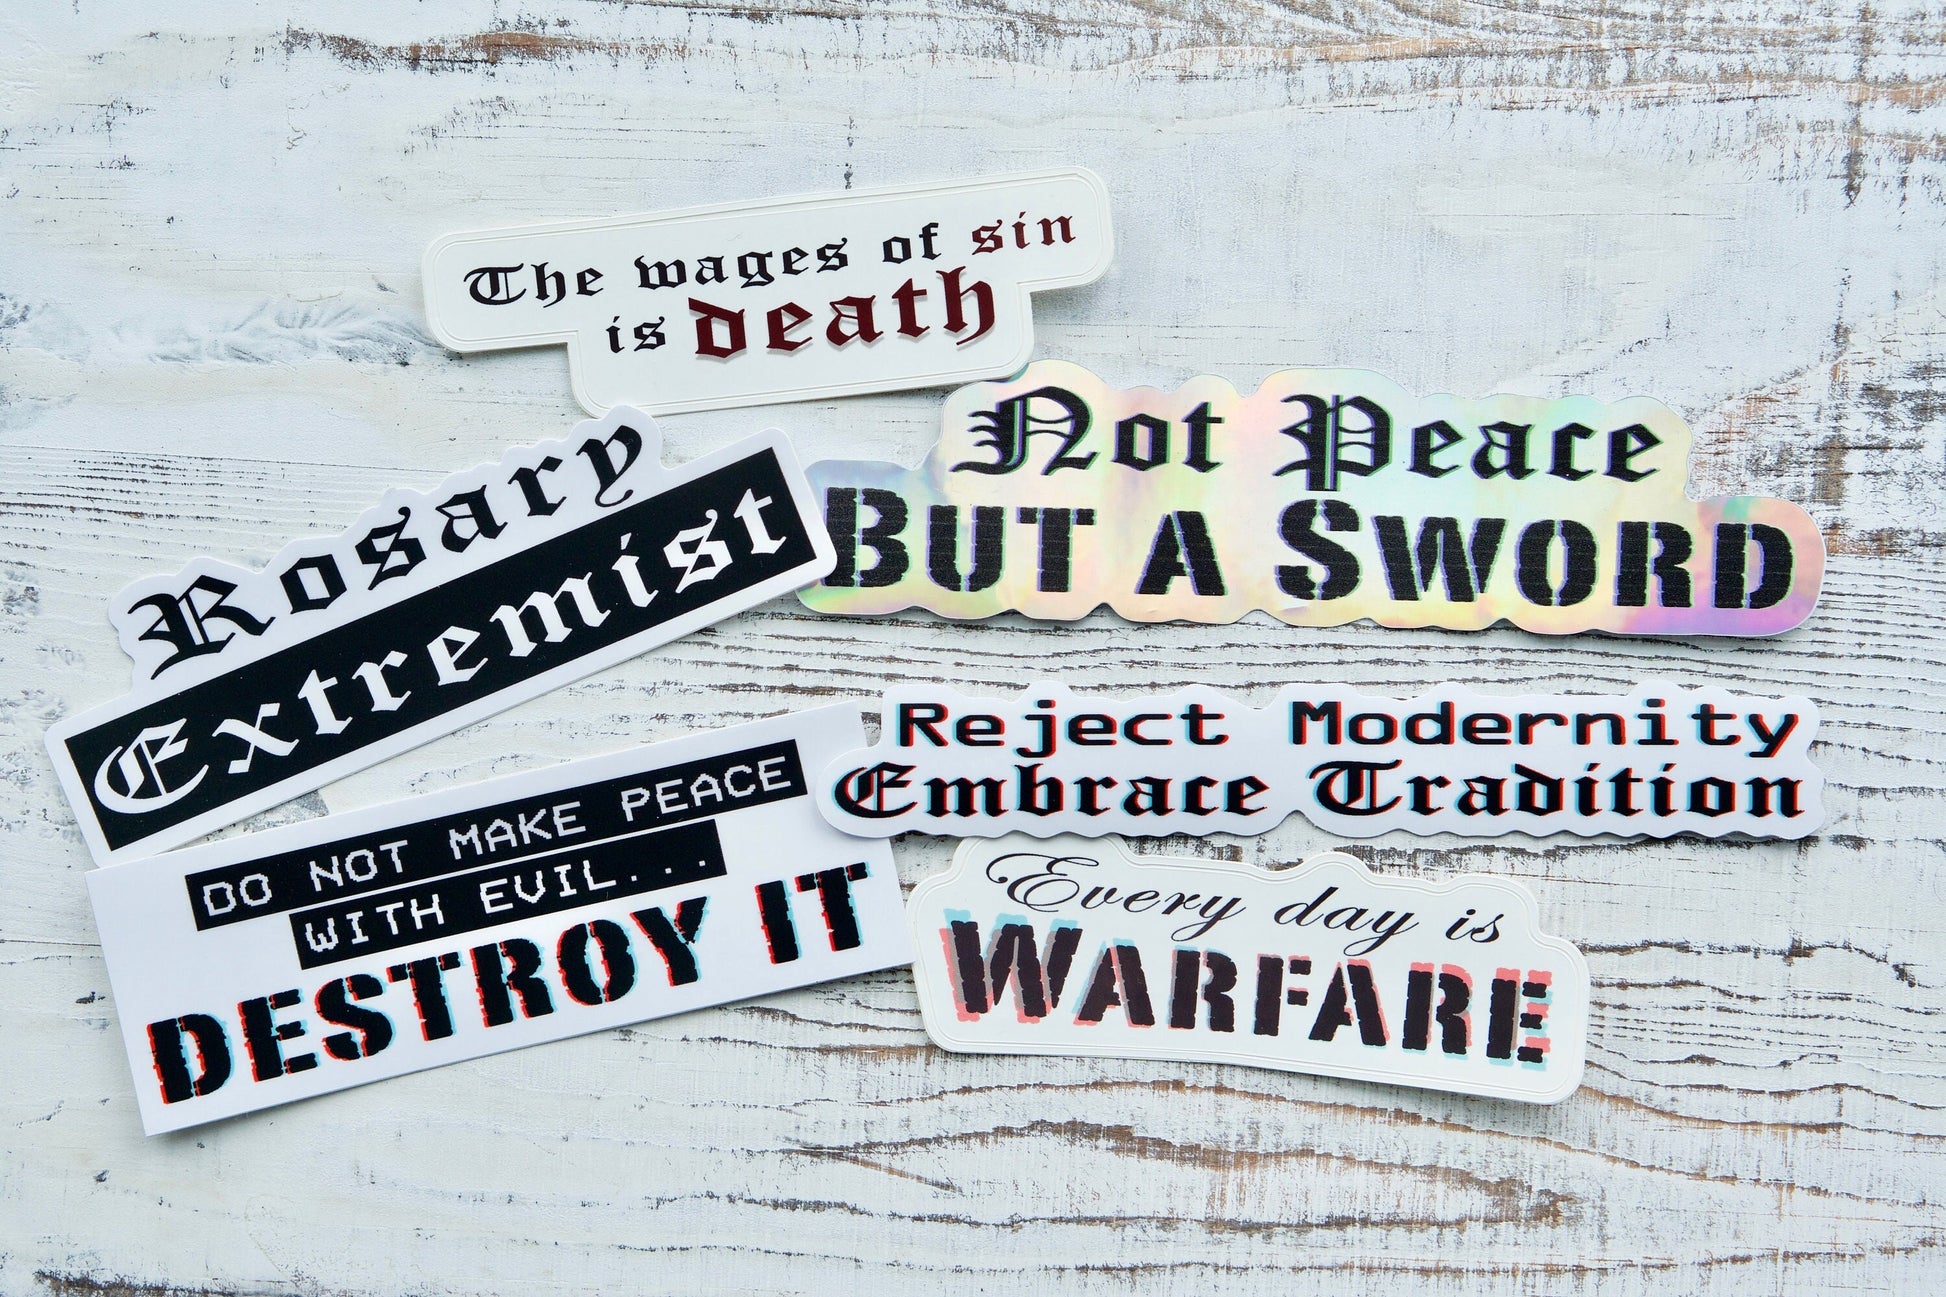 Unleash spiritual warfare with our 6-pack Warfare sticker assortment! Share Catholic faith messages on laptops, water bottles, notebooks, or anywhere you want to spread the word. Perfectly paired with a durable paracord rosary for ultimate Catholic gift sets.